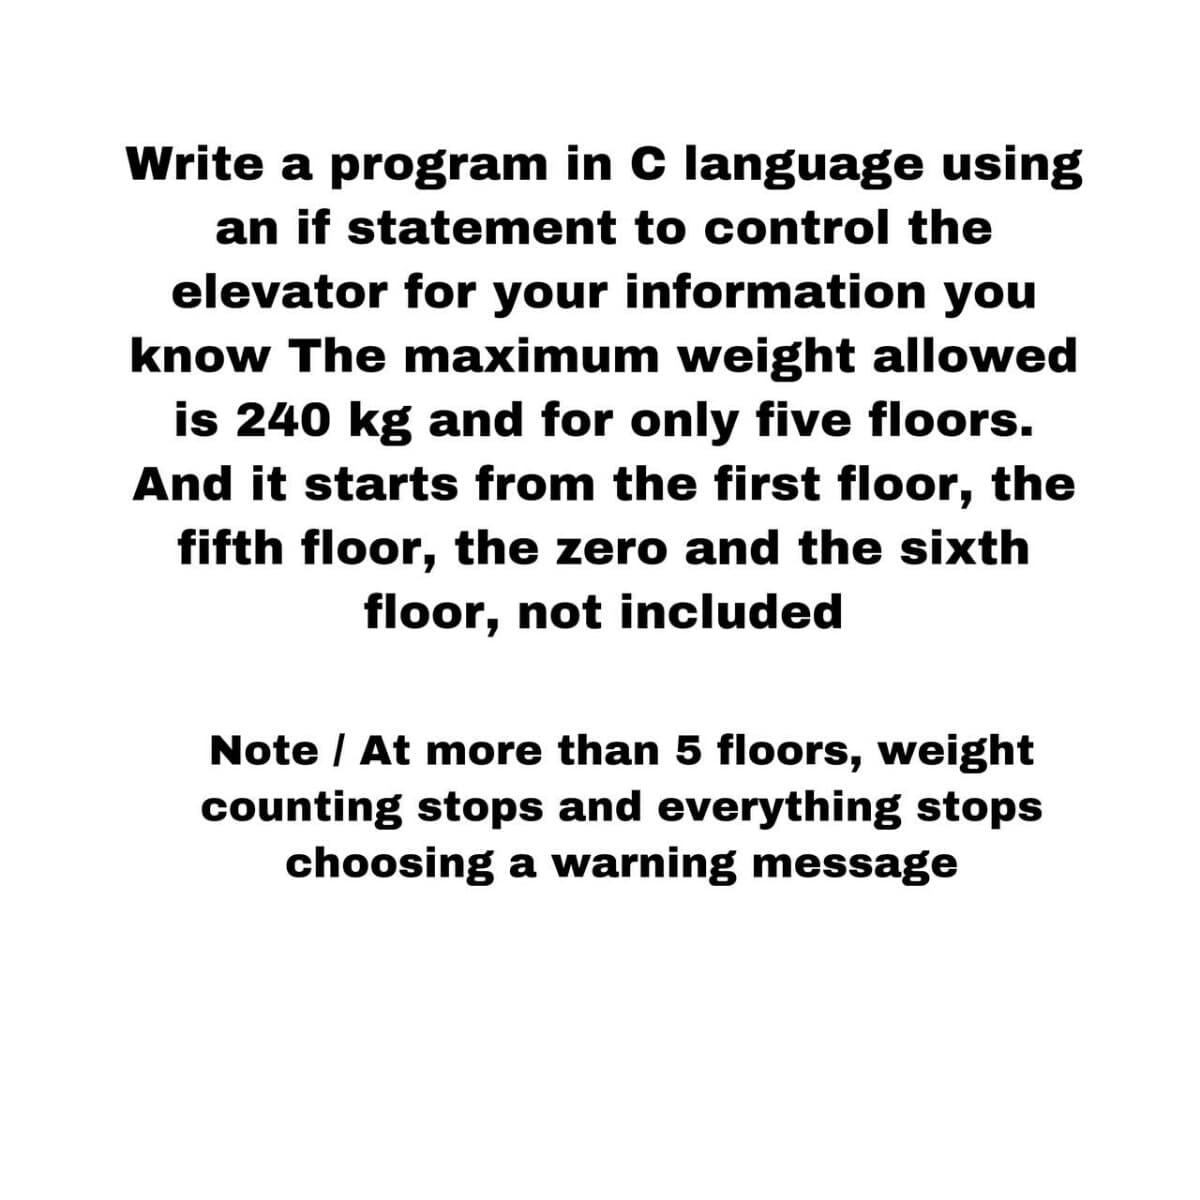 Write a program in C language using
an if statement to control the
elevator for your information you
know The maximum weight allowed
is 240 kg and for only five floors.
And it starts from the first floor, the
fifth floor, the zero and the sixth
floor, not included
Note / At more than 5 floors, weight
counting stops and everything stops
choosing a warning message
